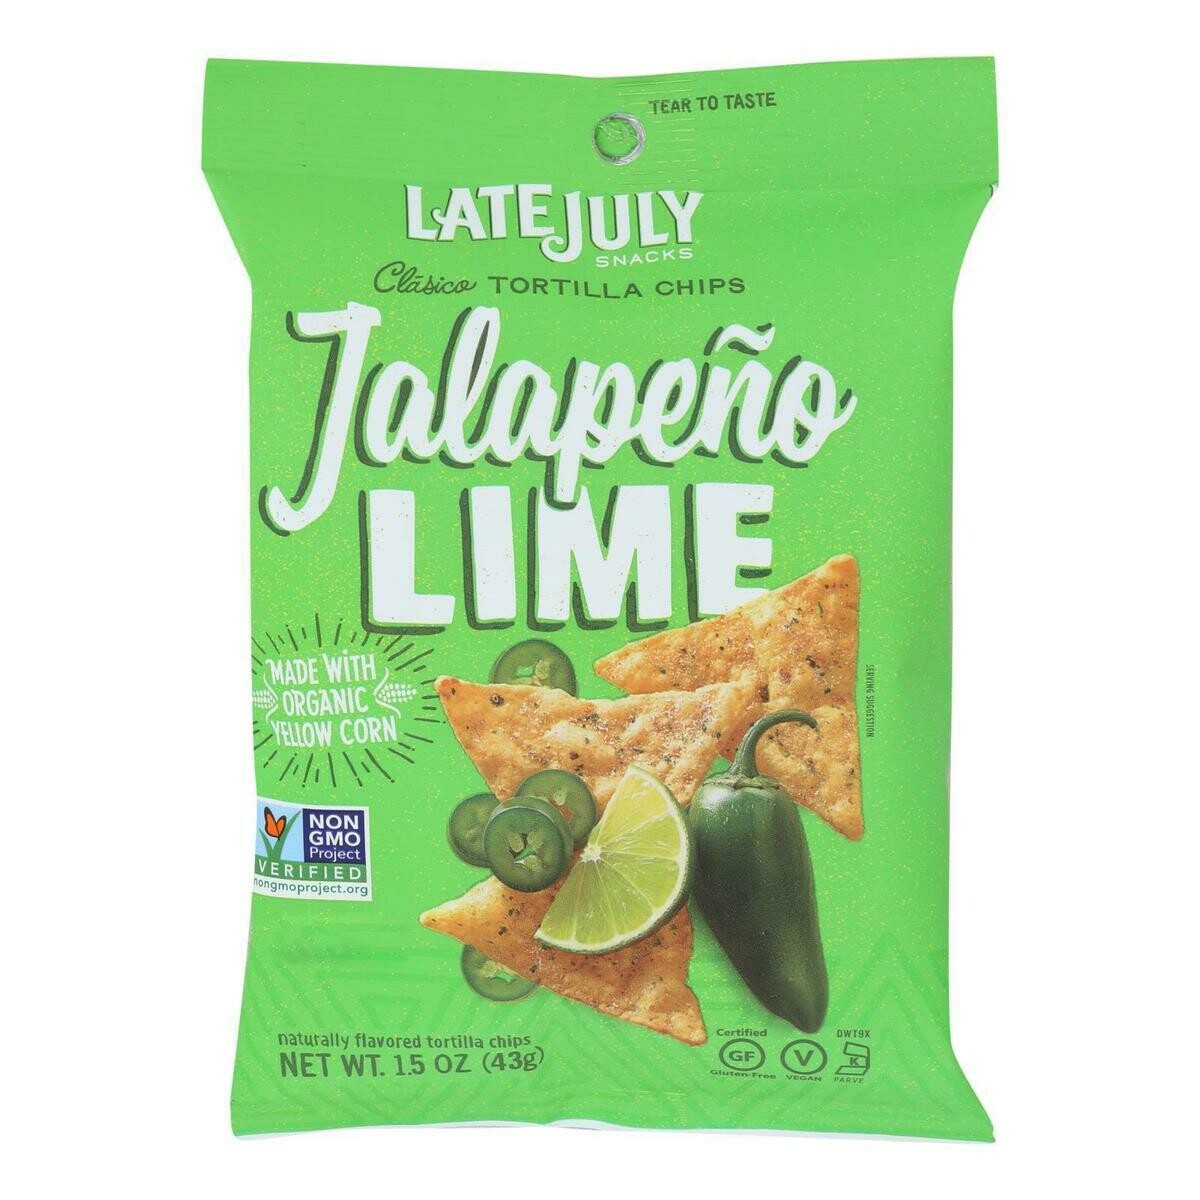 Chips / Small Bag / Late July Jalapeno Lime Corn Chips, 1.5 oz.